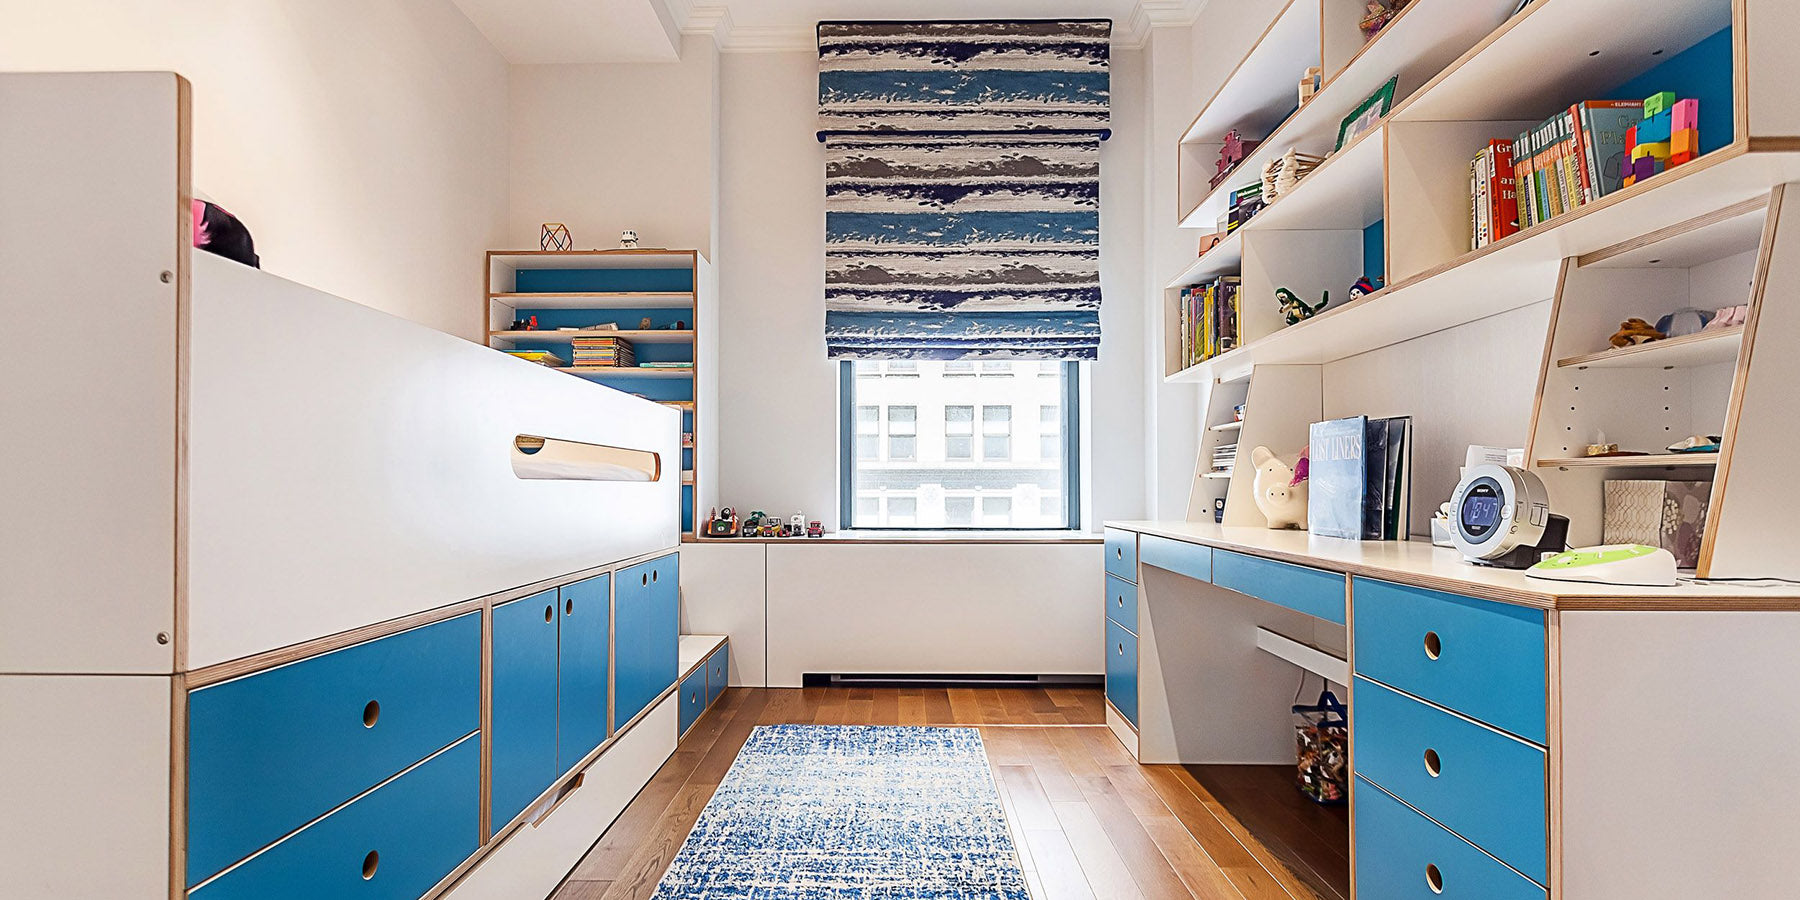 Modern child's room with white and blue storage units, built-in shelving, and a cozy study area.